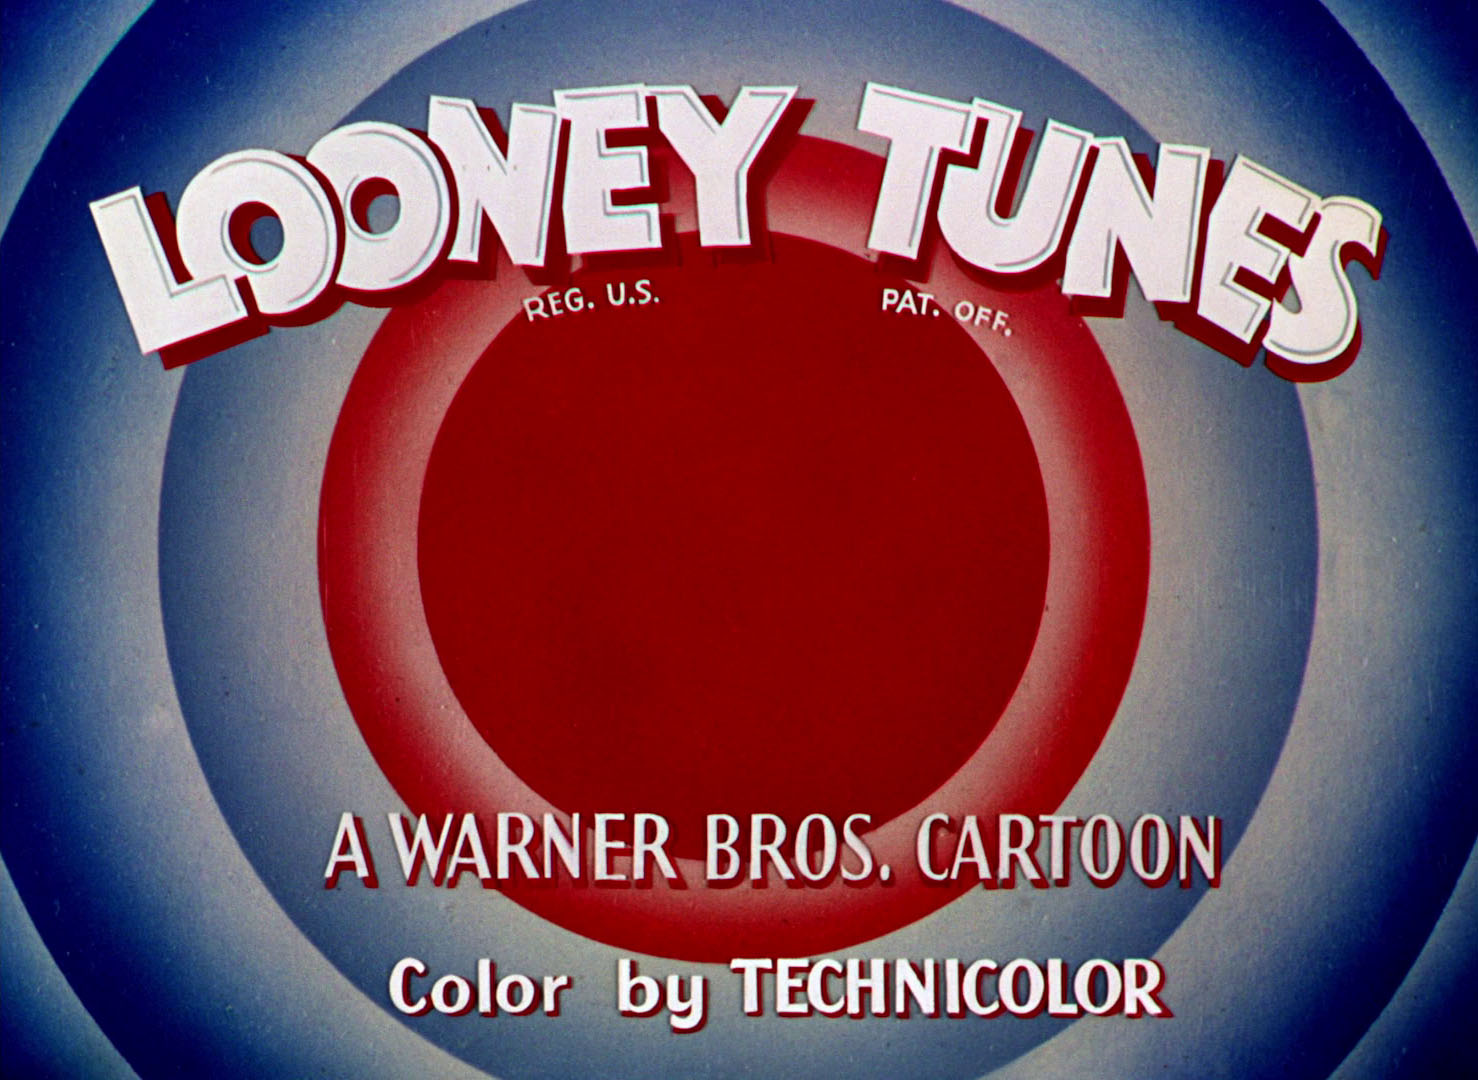 Open tunes. Mouse Menace 1946. Merrie Melodies Blue ribbon. New Looney Tunes Intro. Mouse Menace.